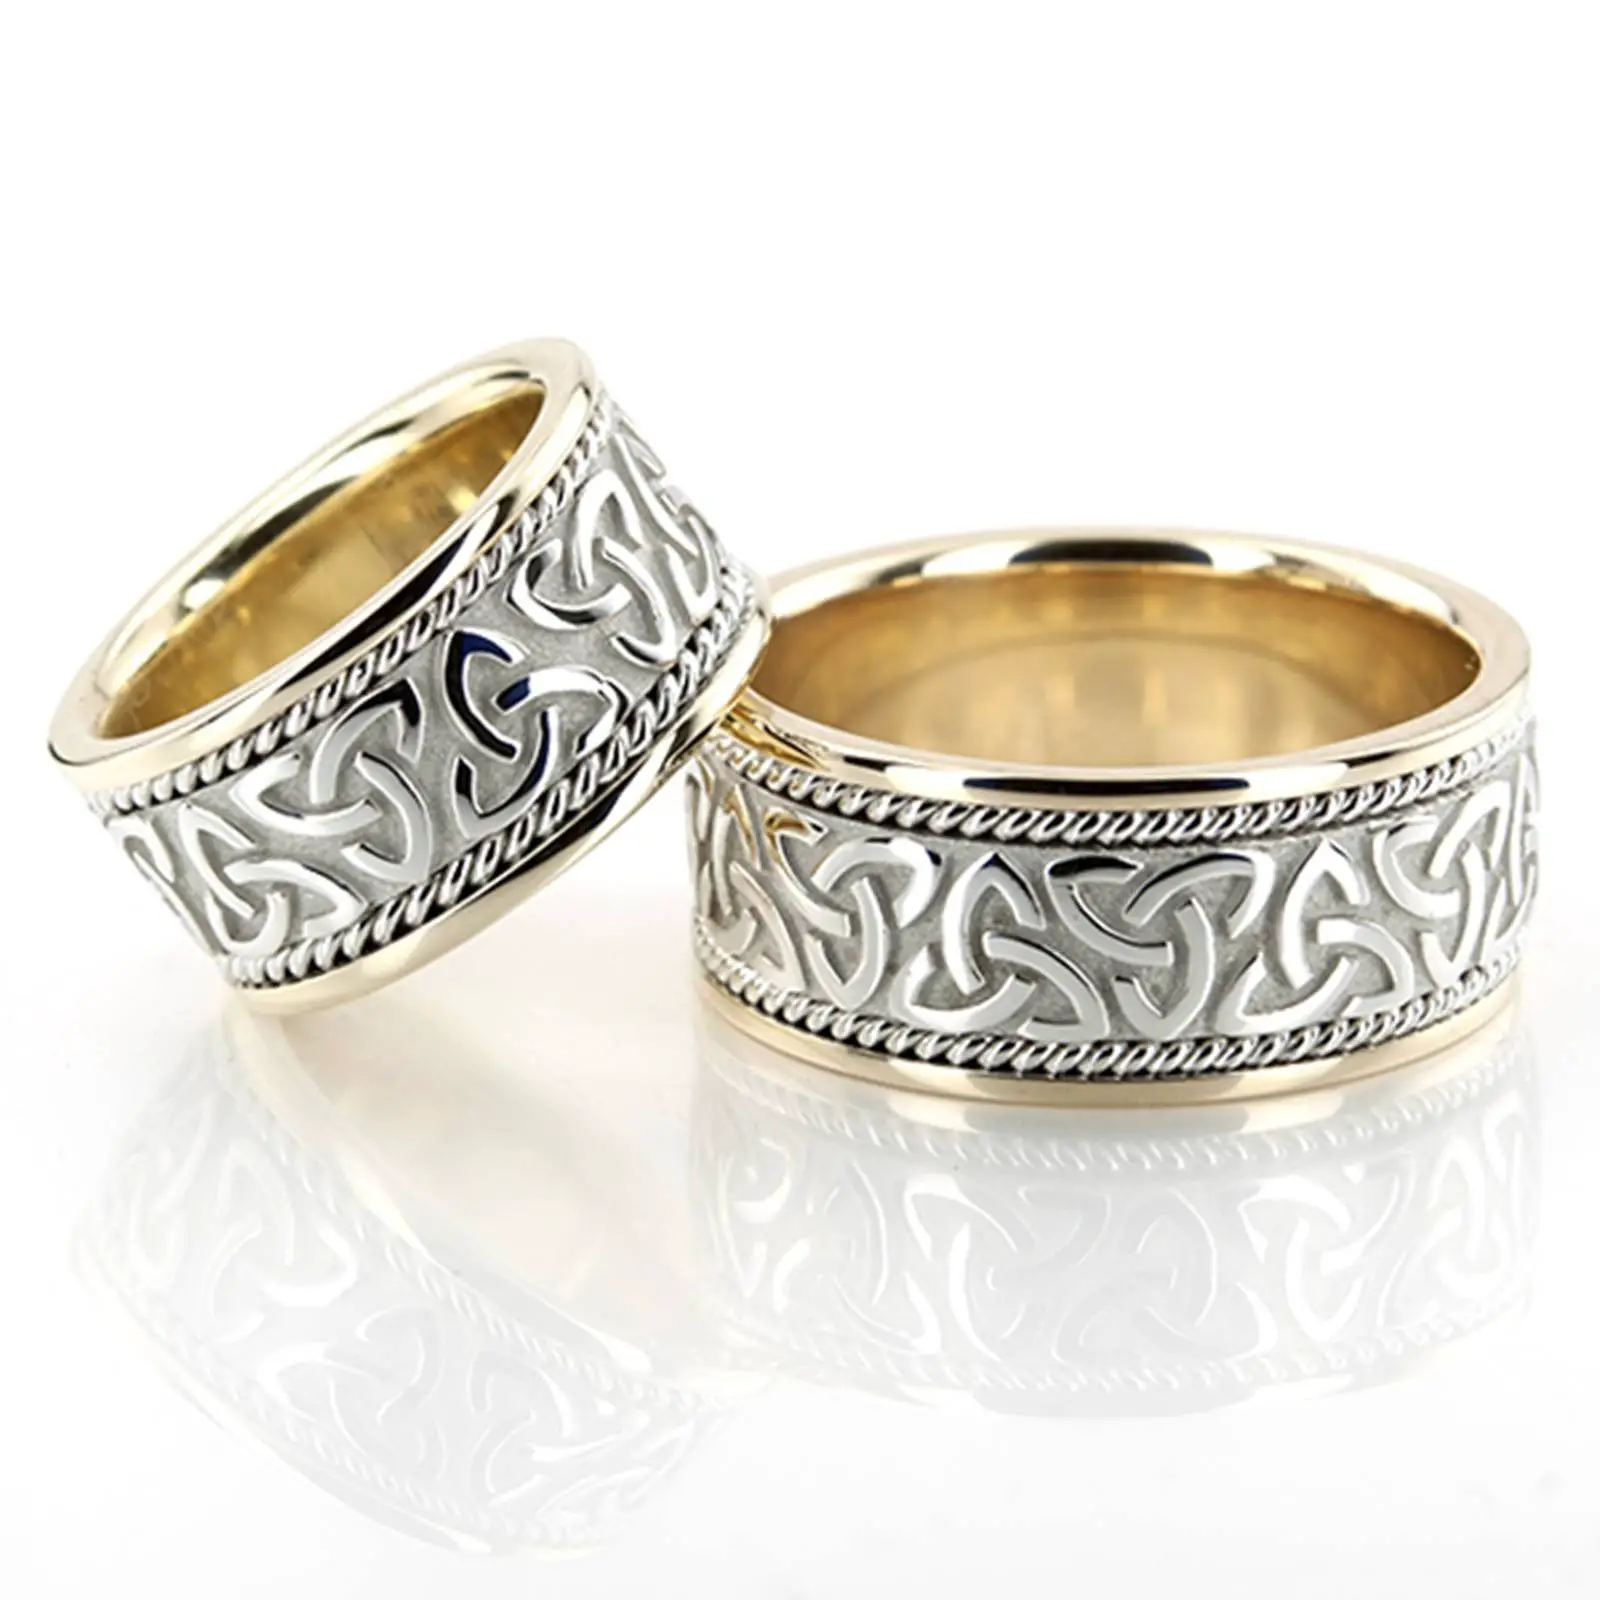 The 15 Best Collection of Irish Wedding Bands for Women